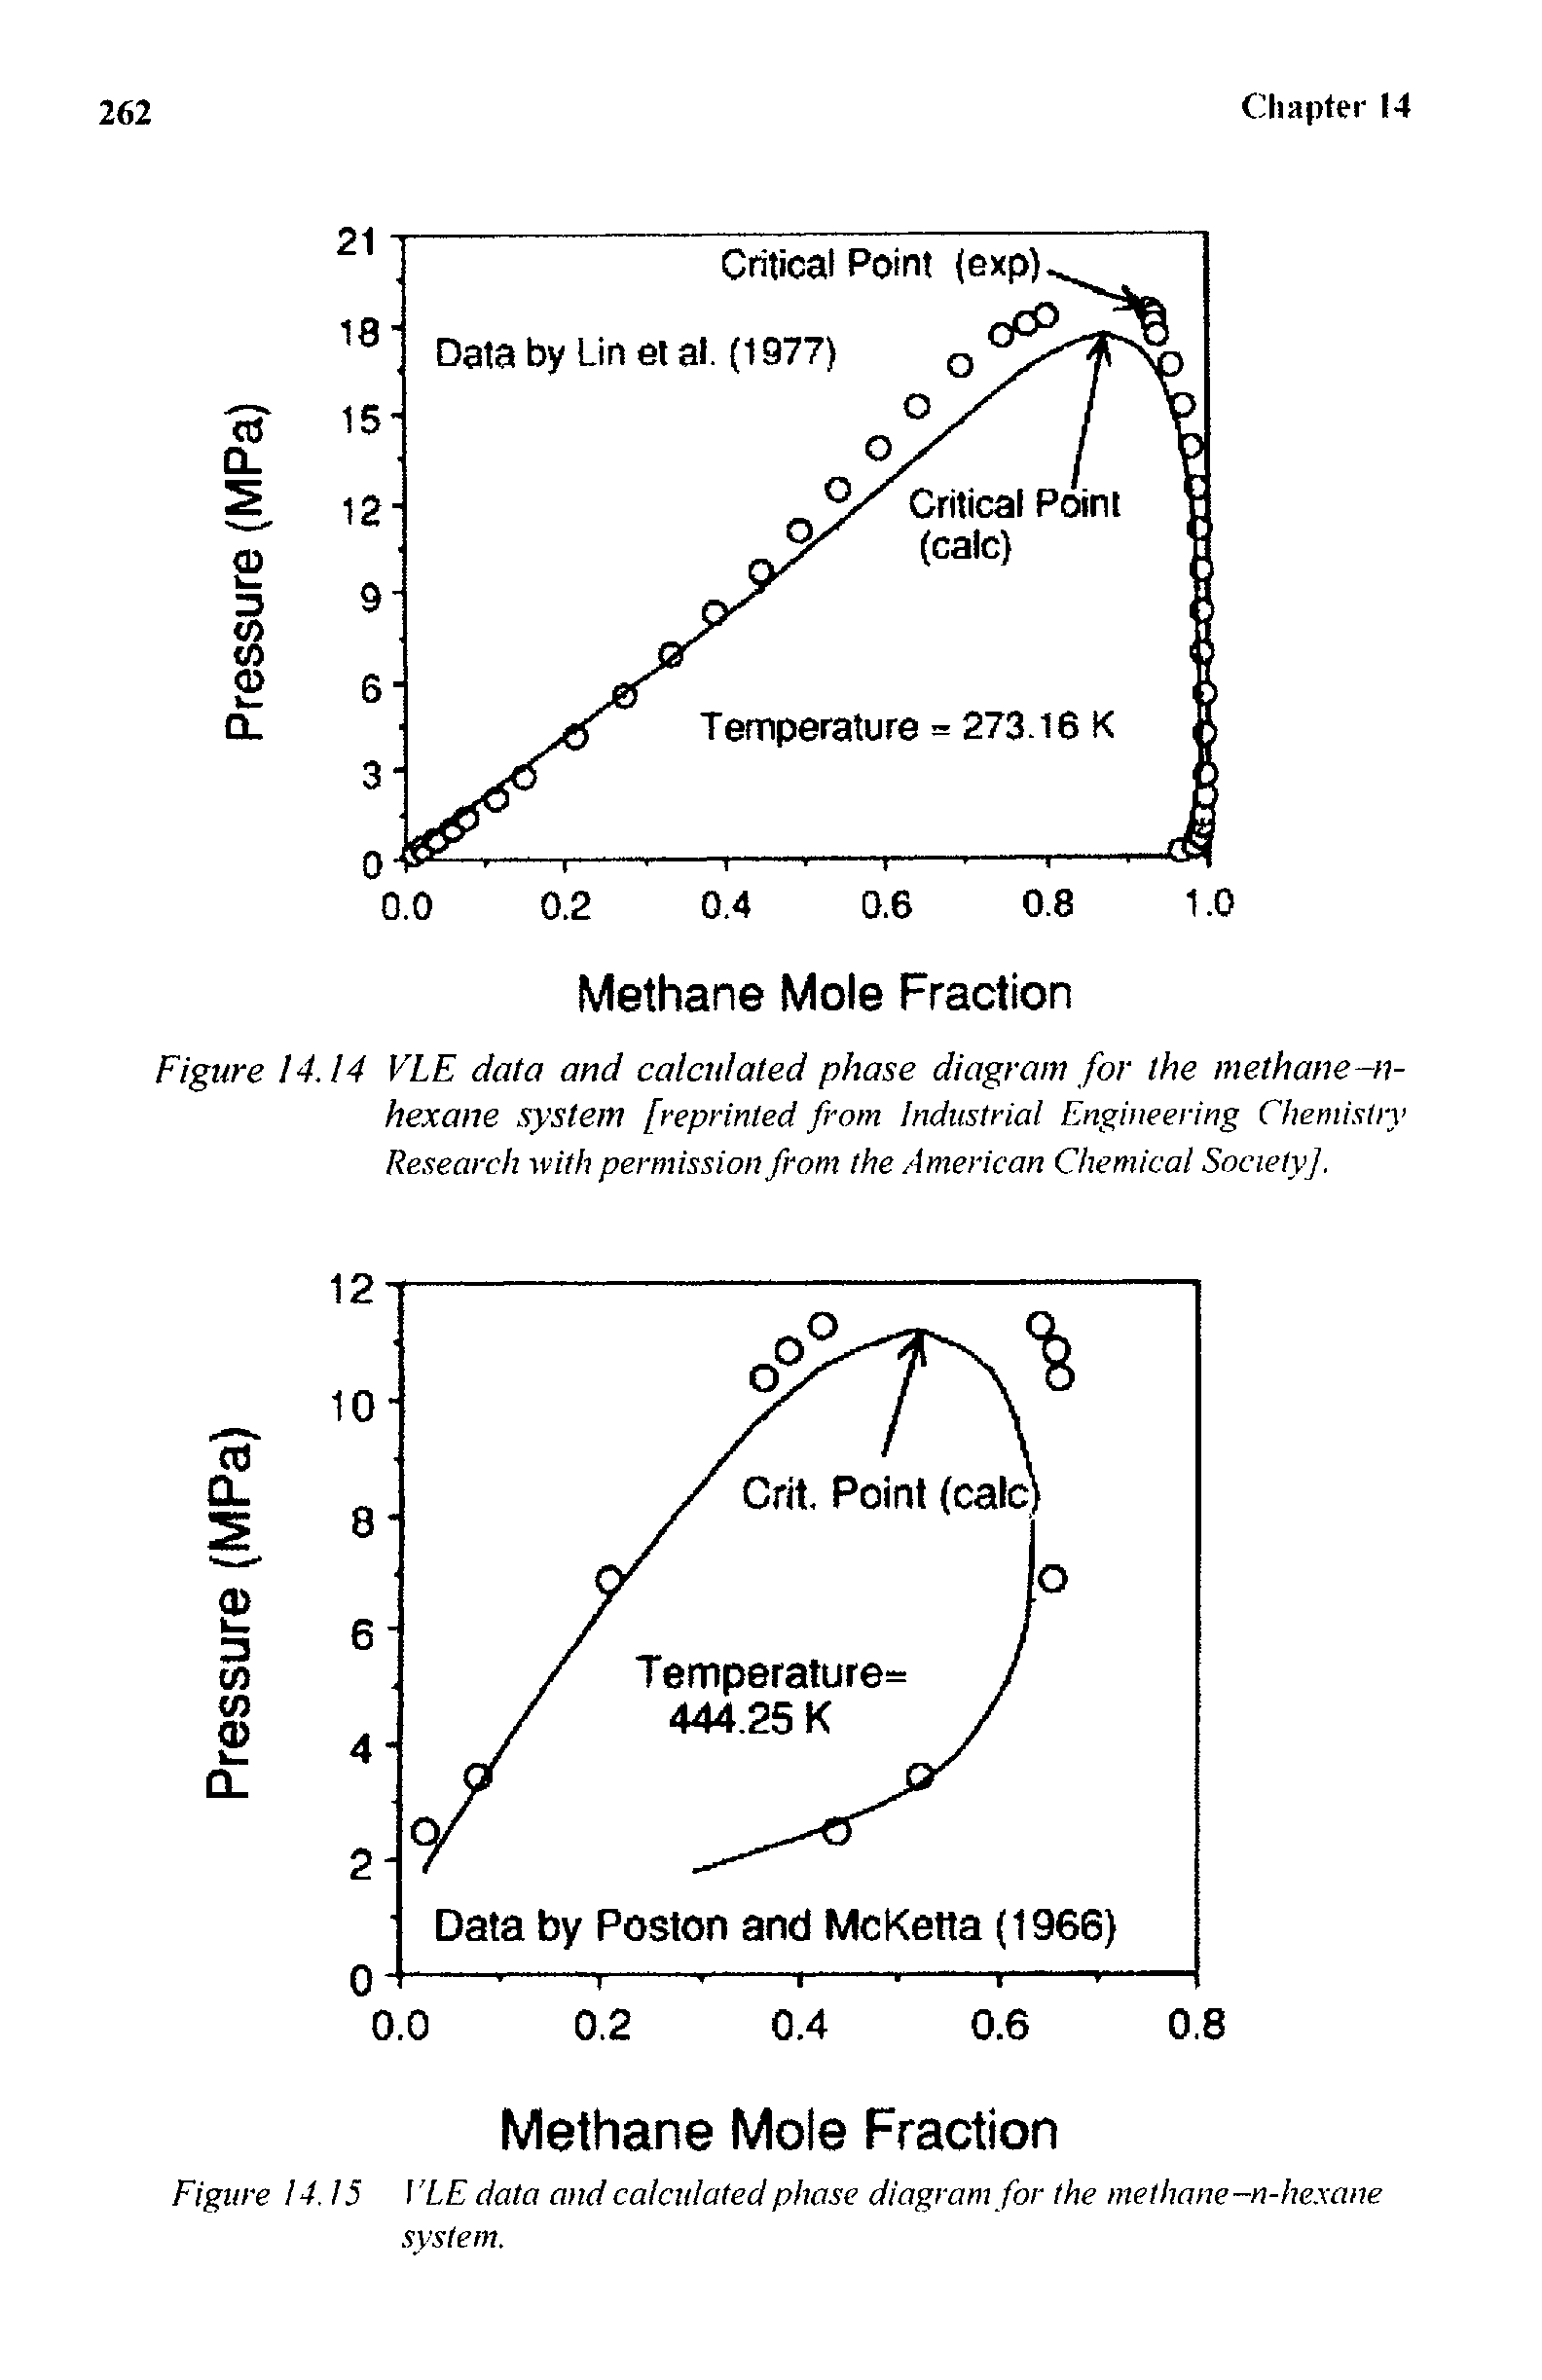 Figure 14.15 LE data and calculated phase diagram for the methane -n-hexane system.